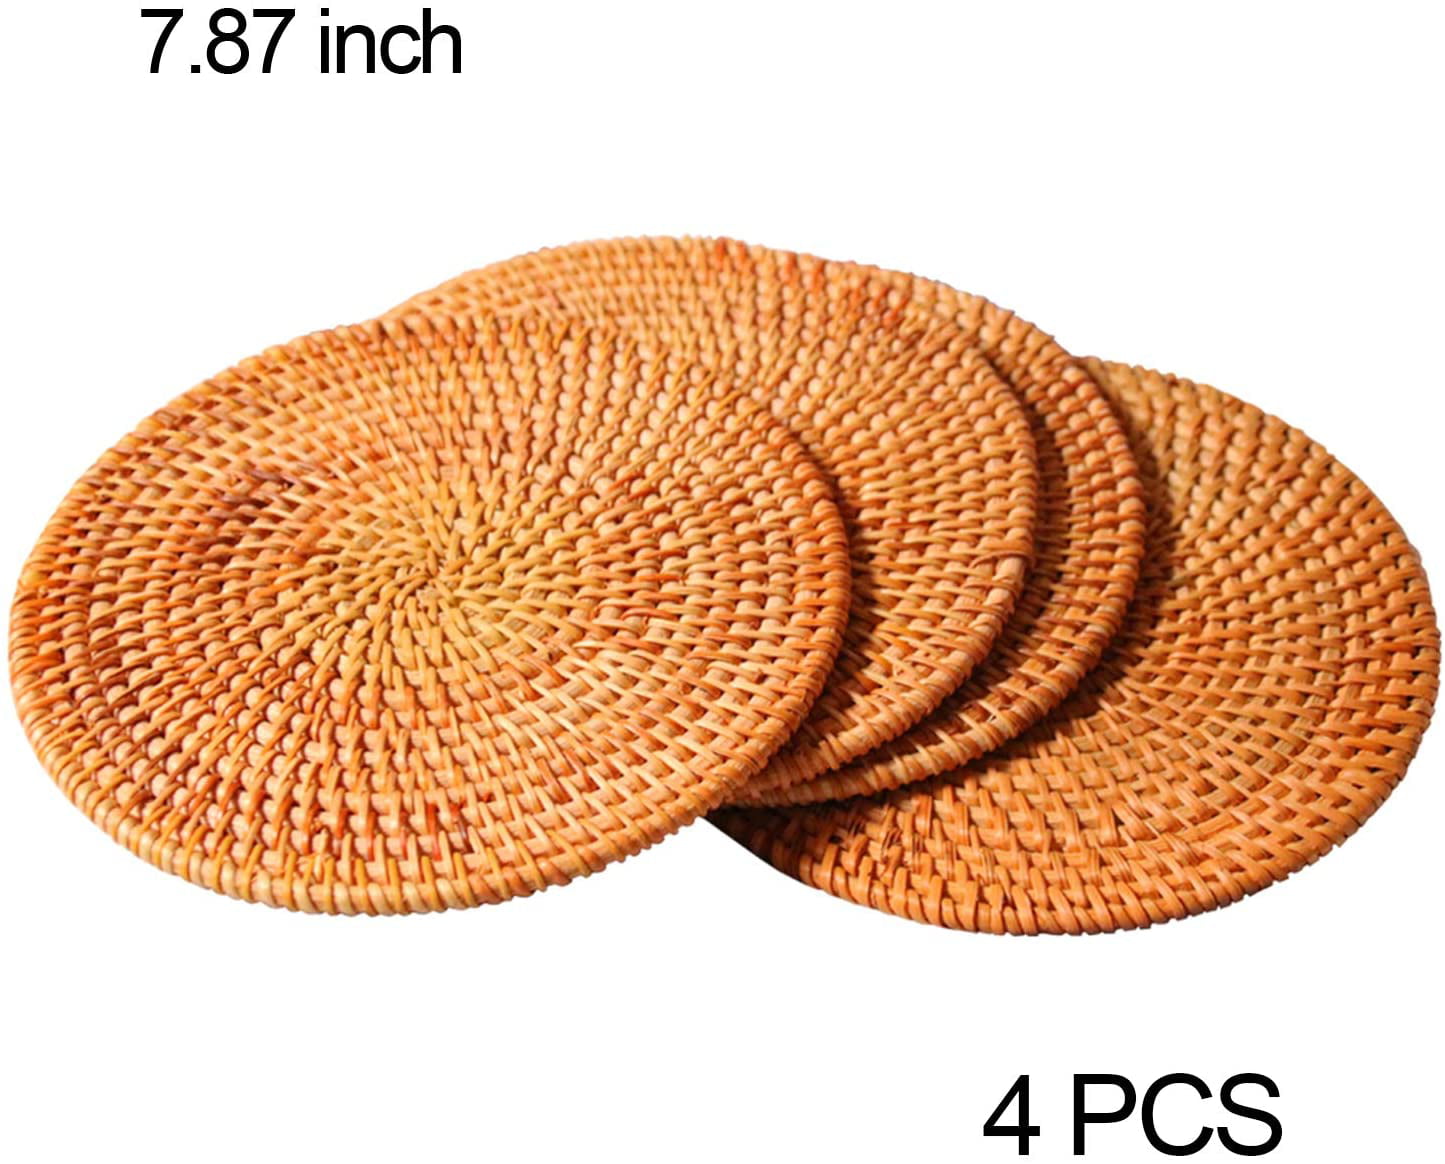 Details about   4 Pcs Rattan Trivets for Hot Dishes-Insulated Hot Pads Durable Pot Holder for